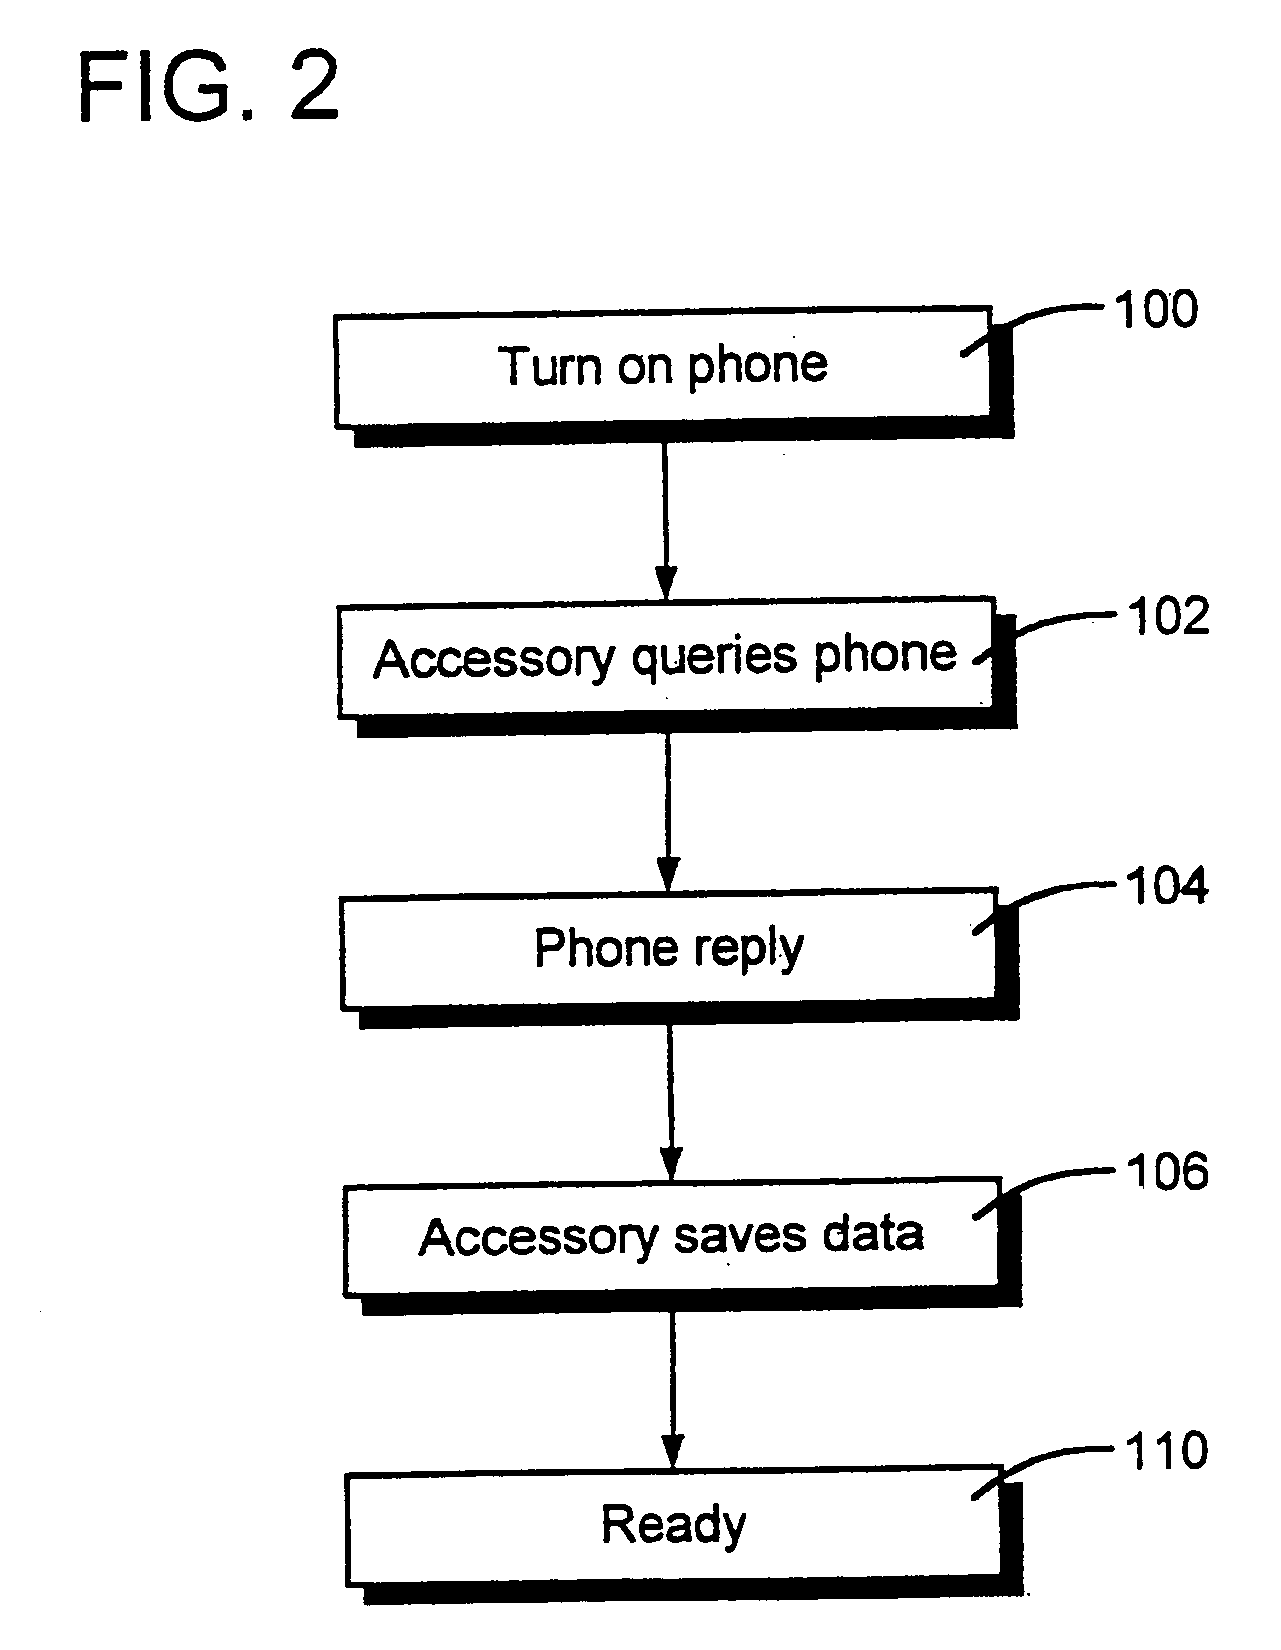 Facility and method for wireless transmission of location data in a voice channel of a digital wireless telecommunications network